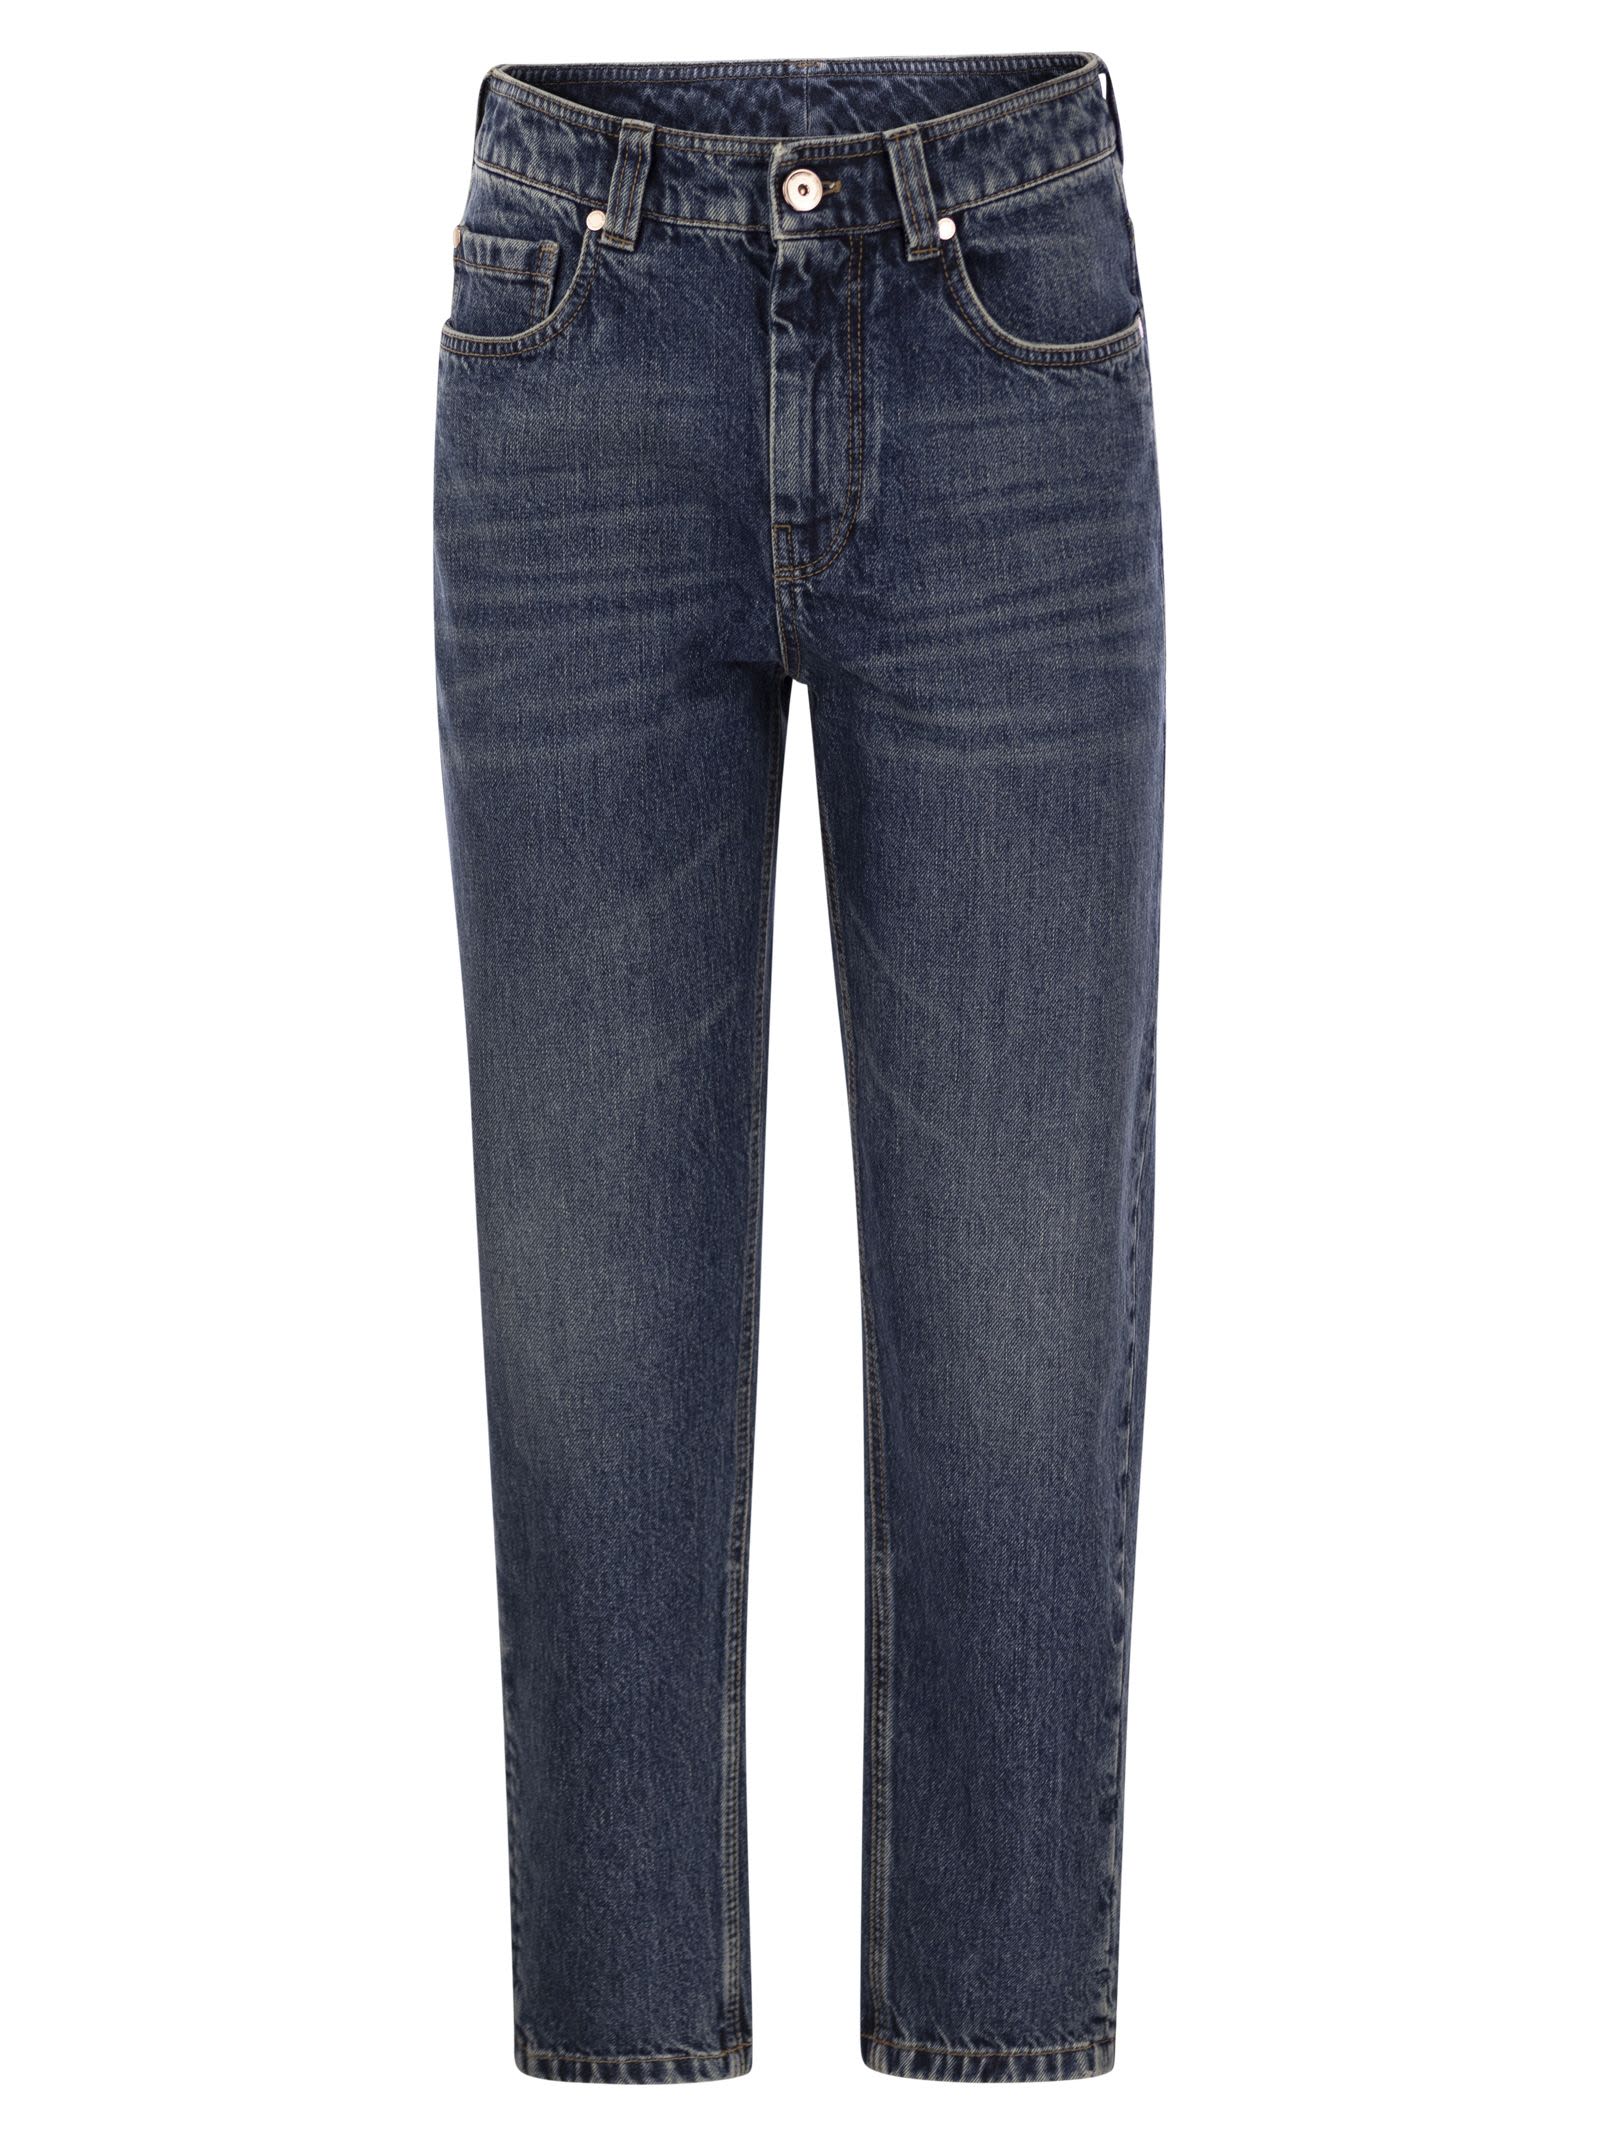 Pantalone Baggy In Denim Authentic Con Shiny Tab